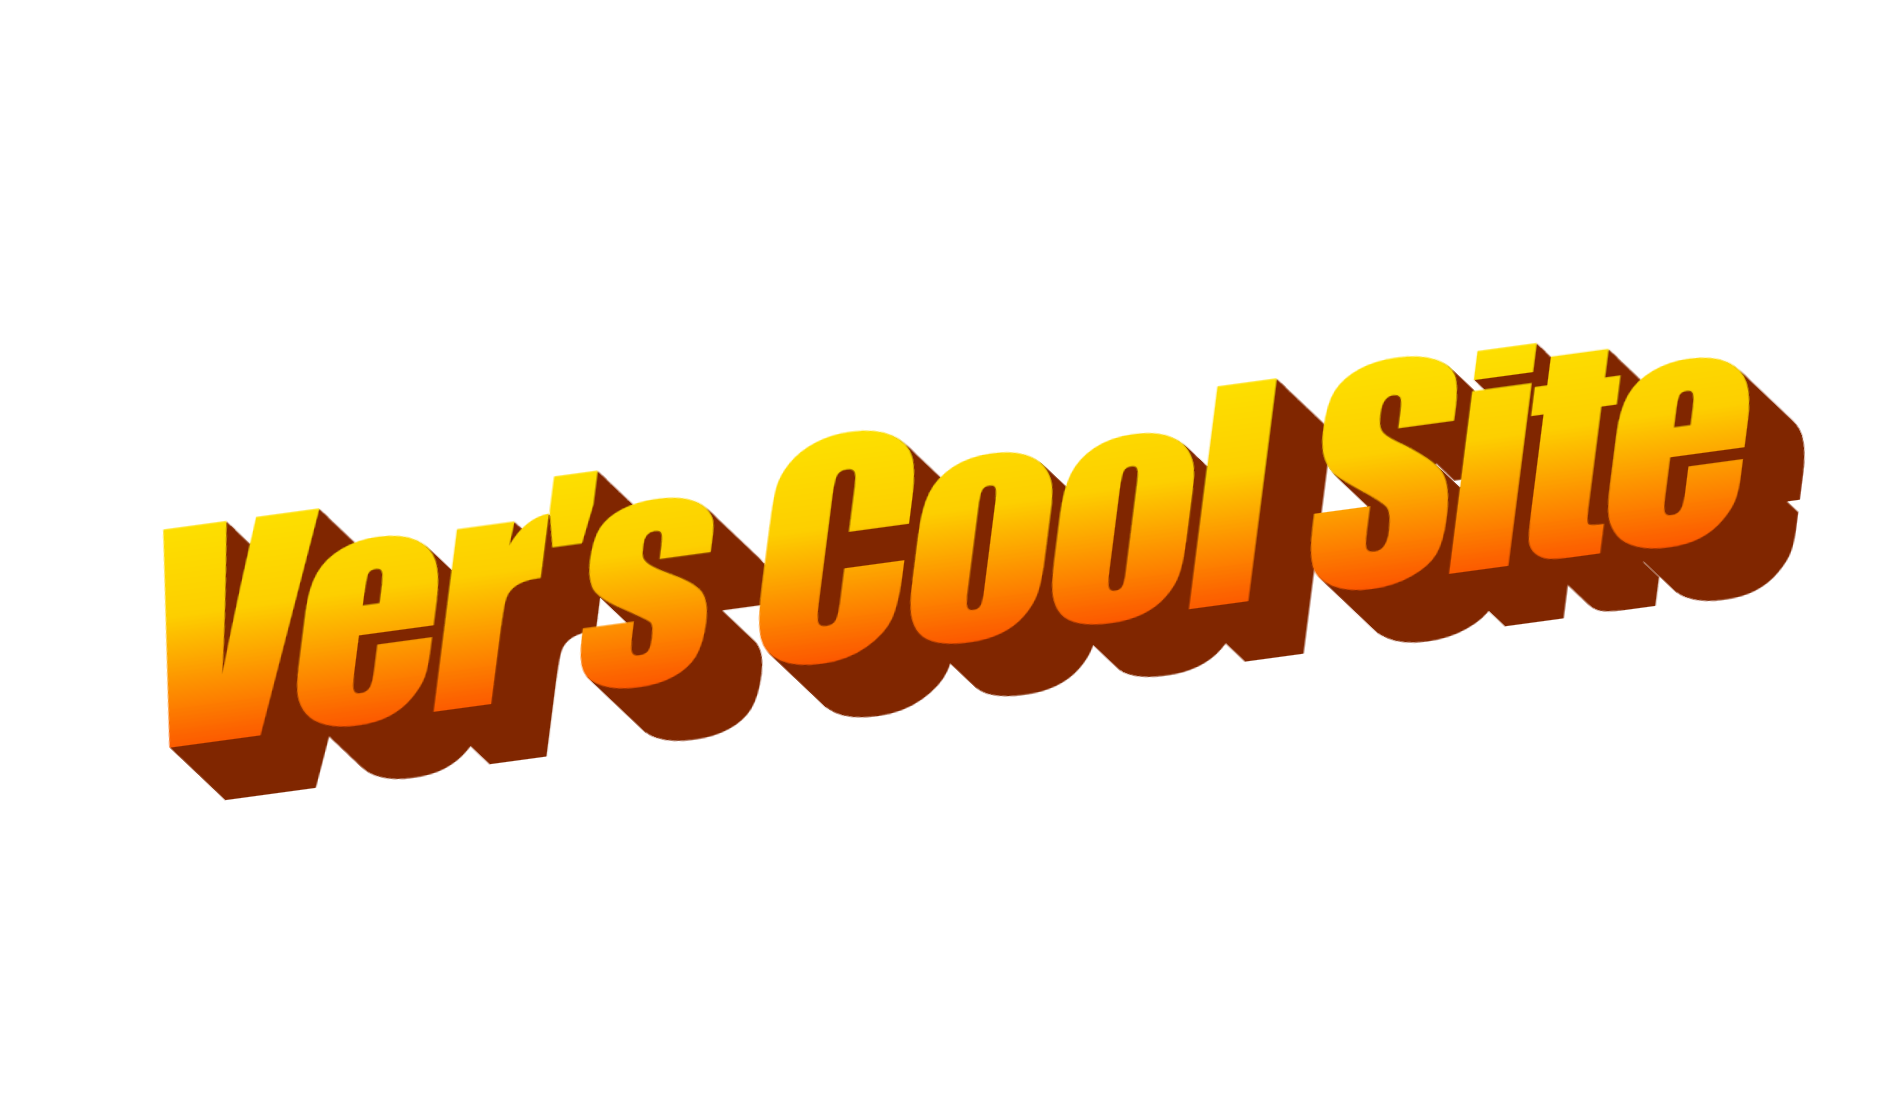 Microsoft Word-style WordArt that reads 'Ver's Cool Site'